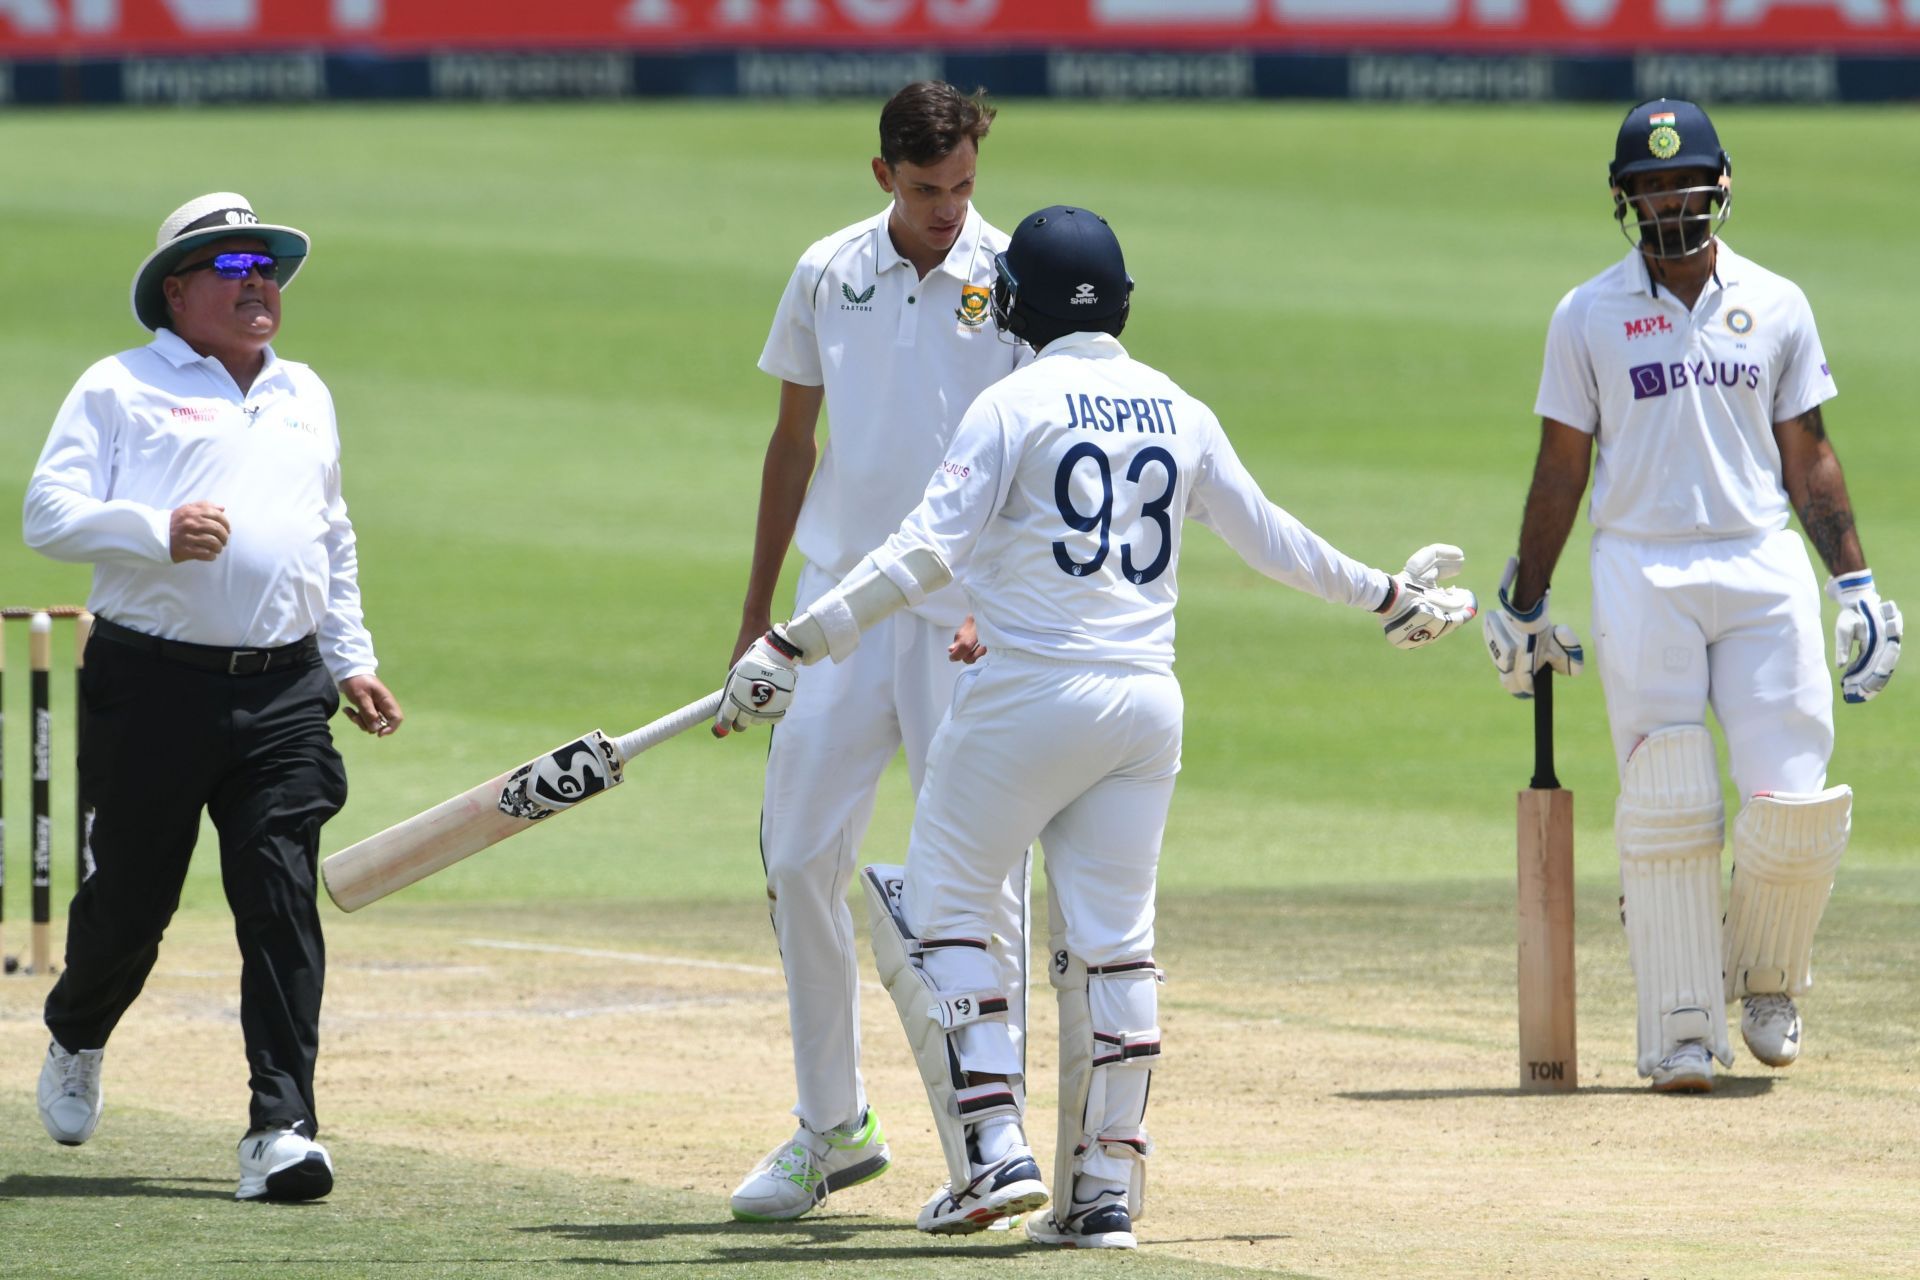 Tempers flared in the second India vs South Africa Test